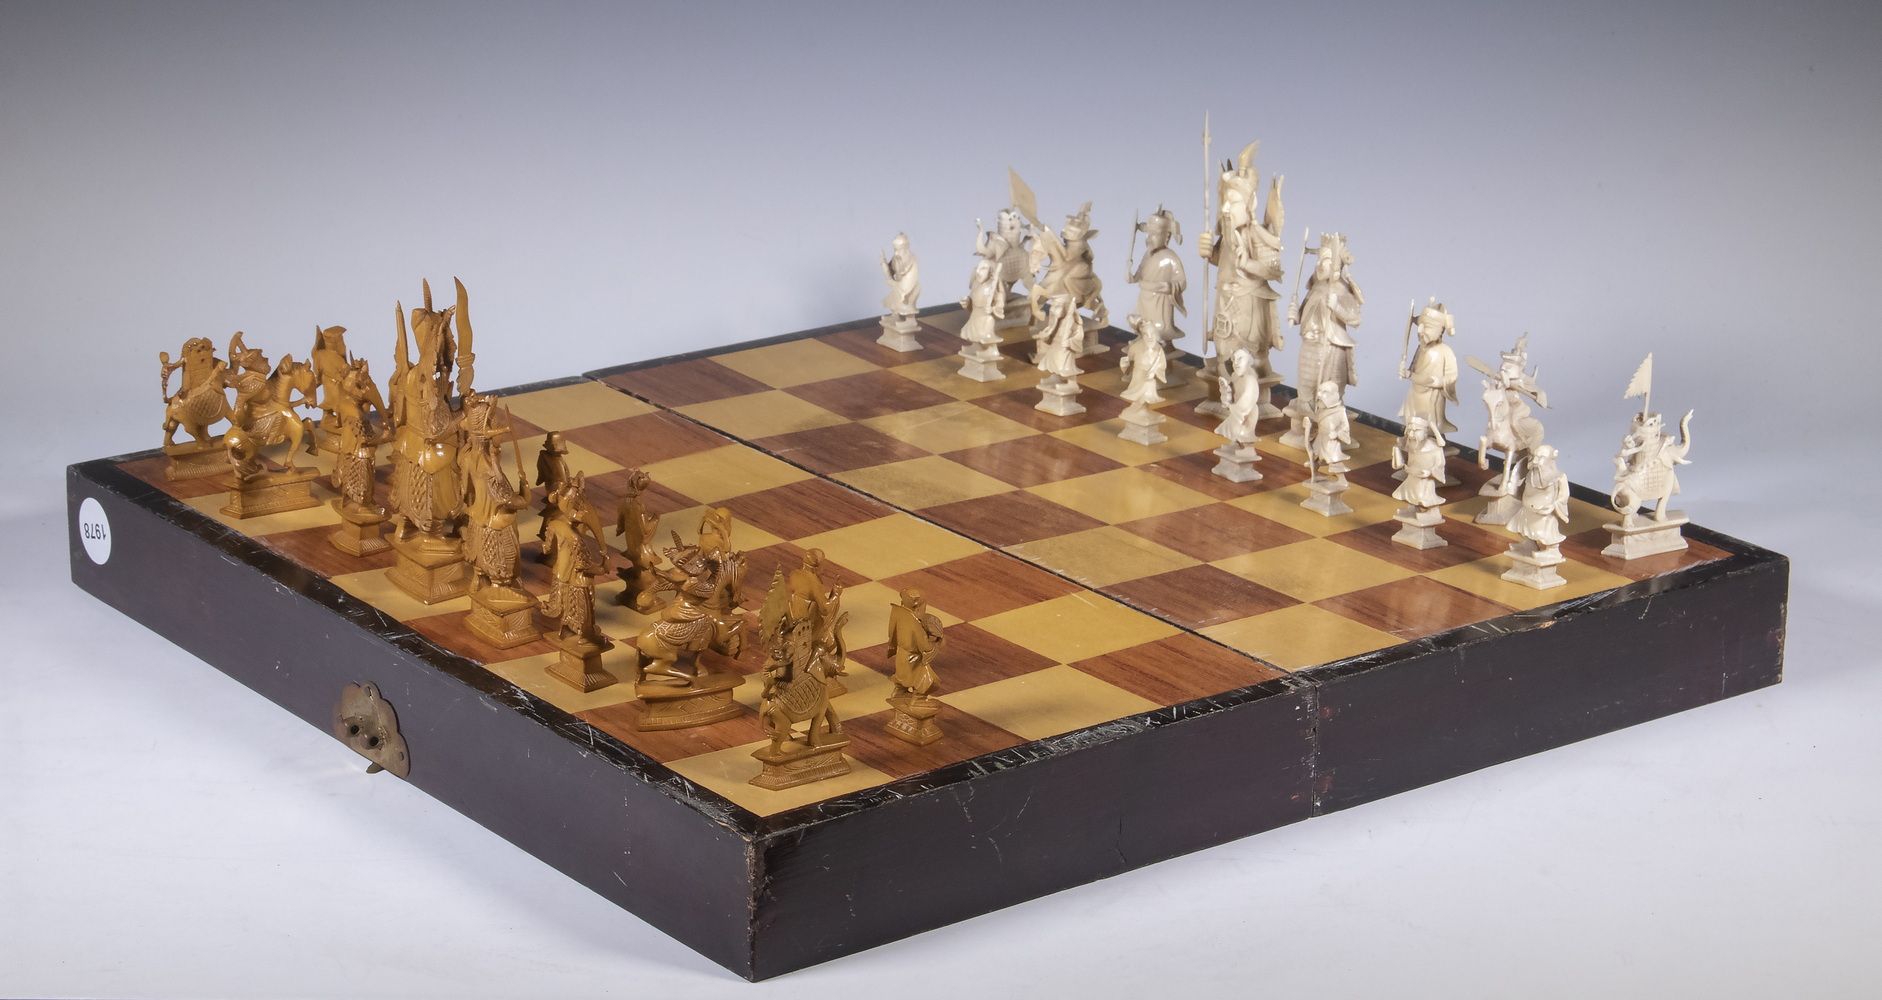 CHINESE CASED CHESS SET A large Chinese